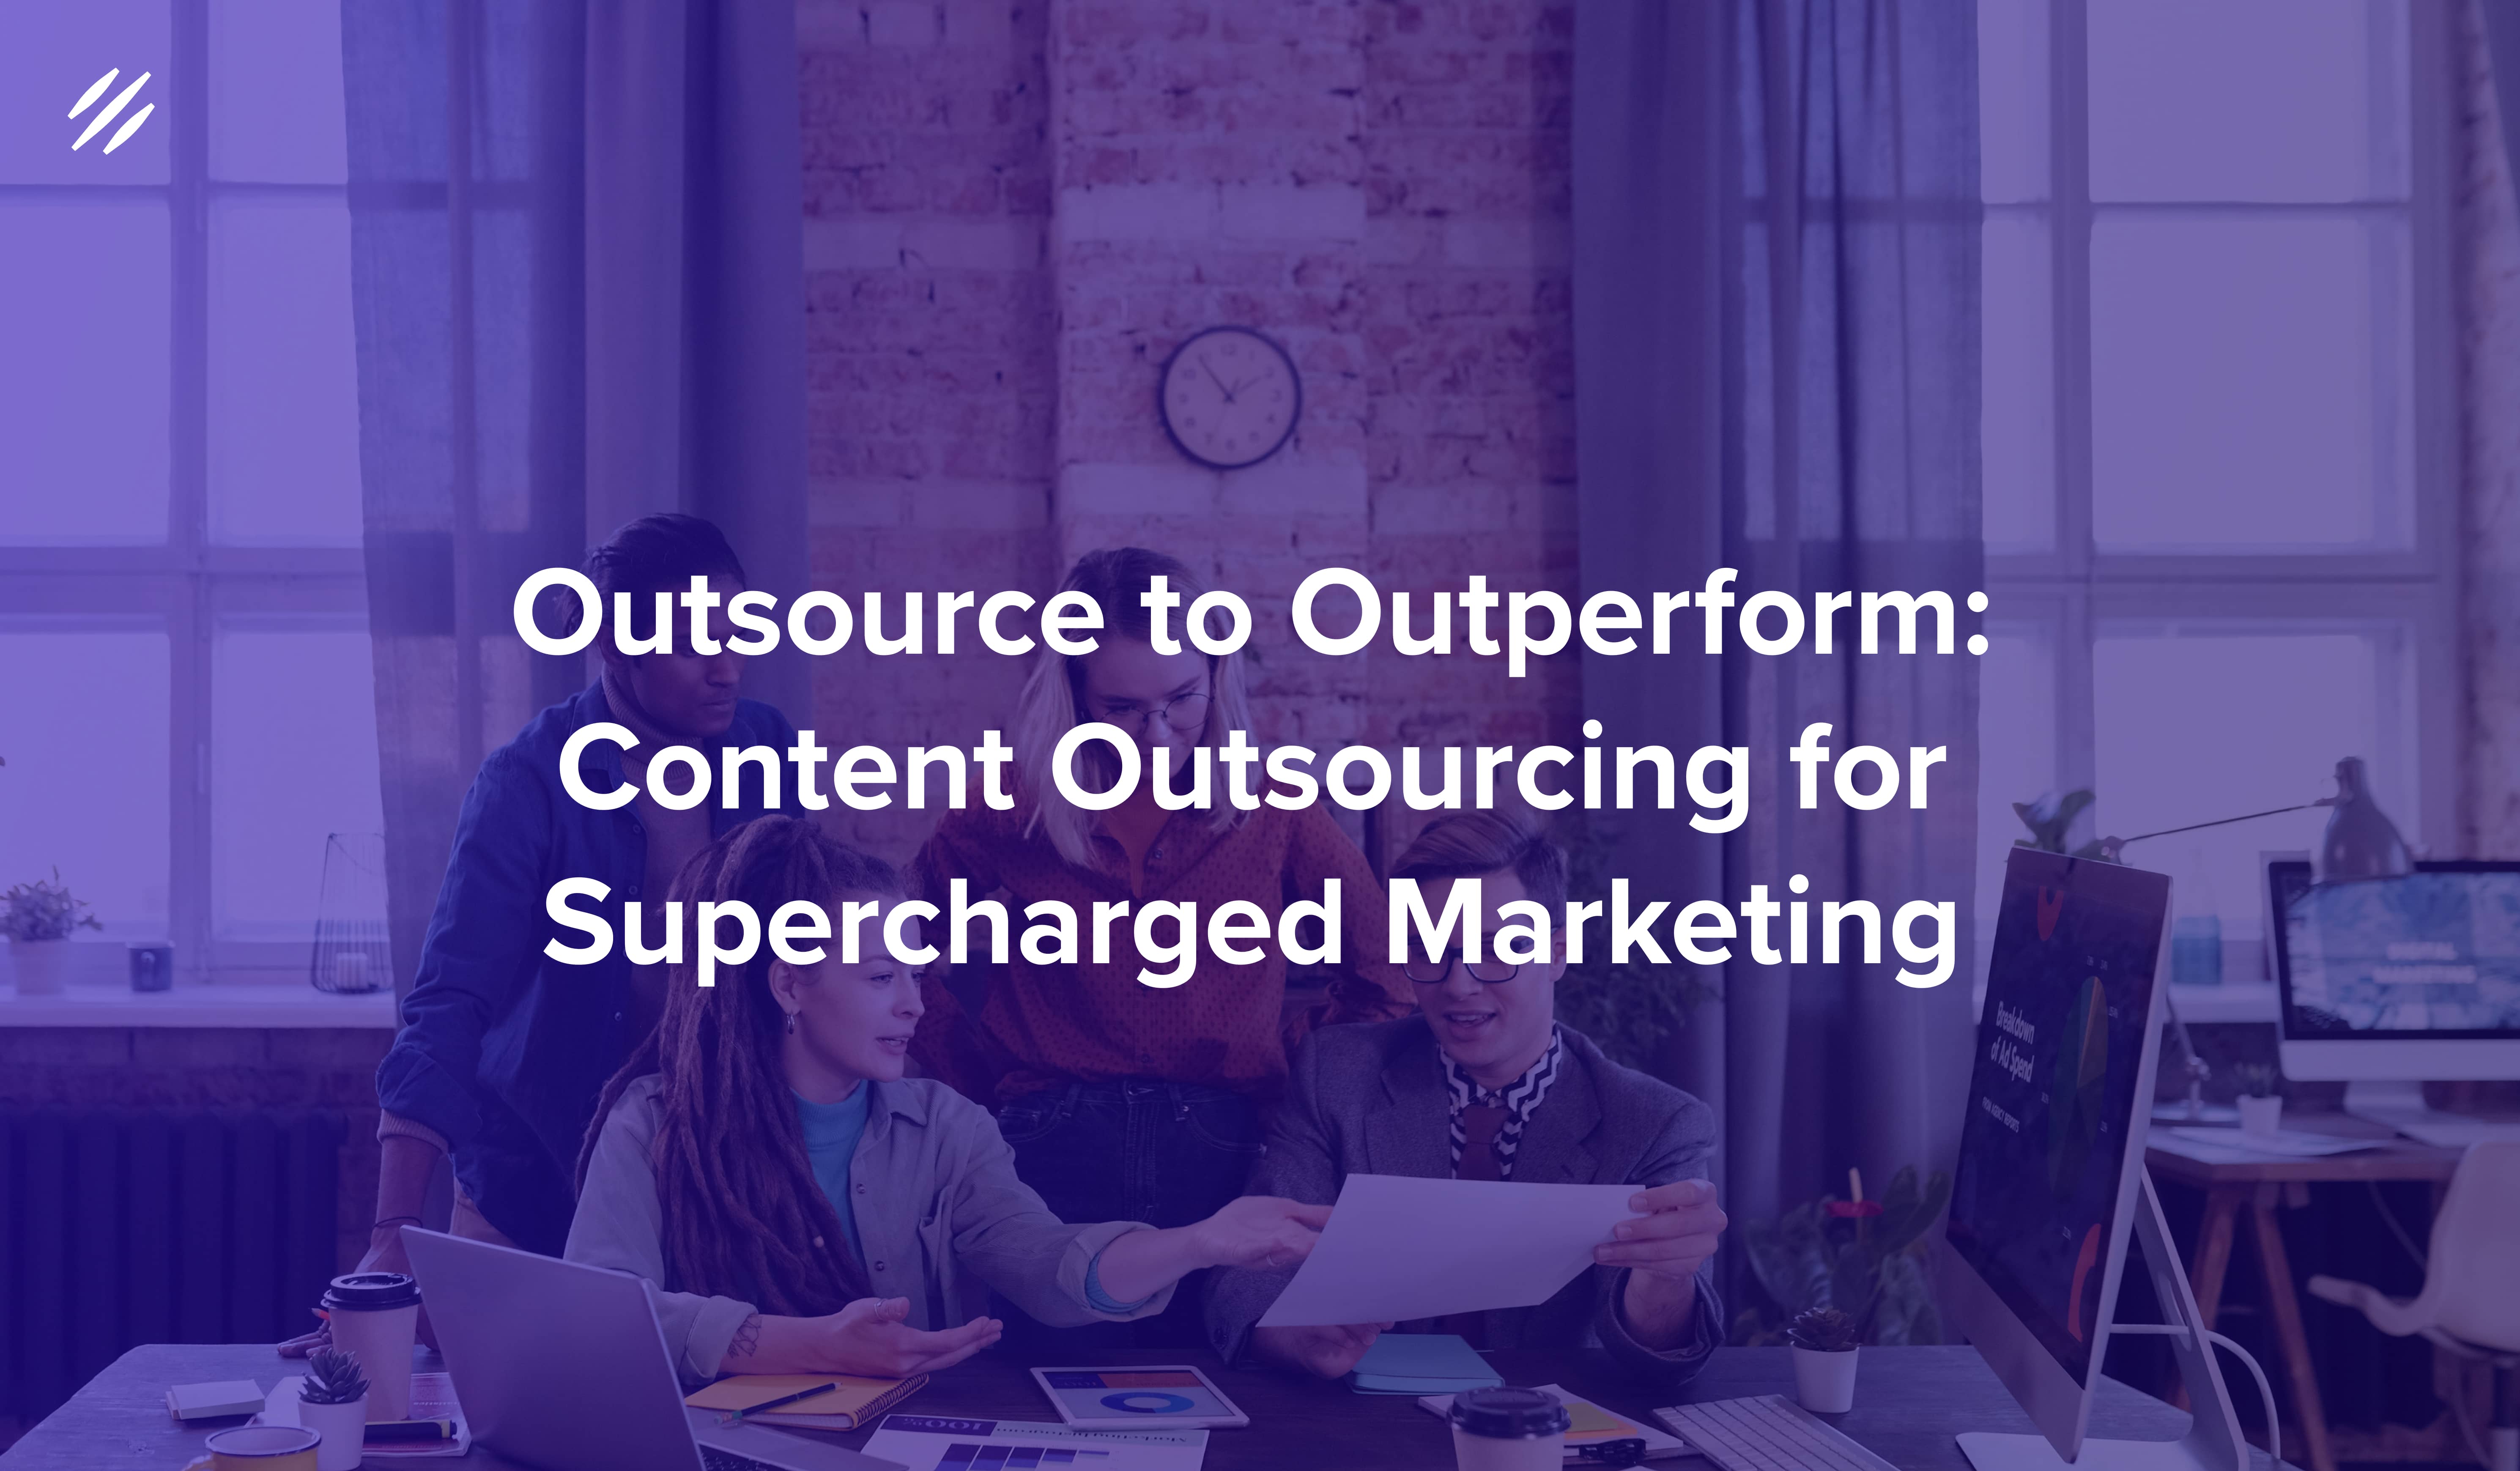 Outsource to Outperform: Content Outsourcing for Supercharged Marketing